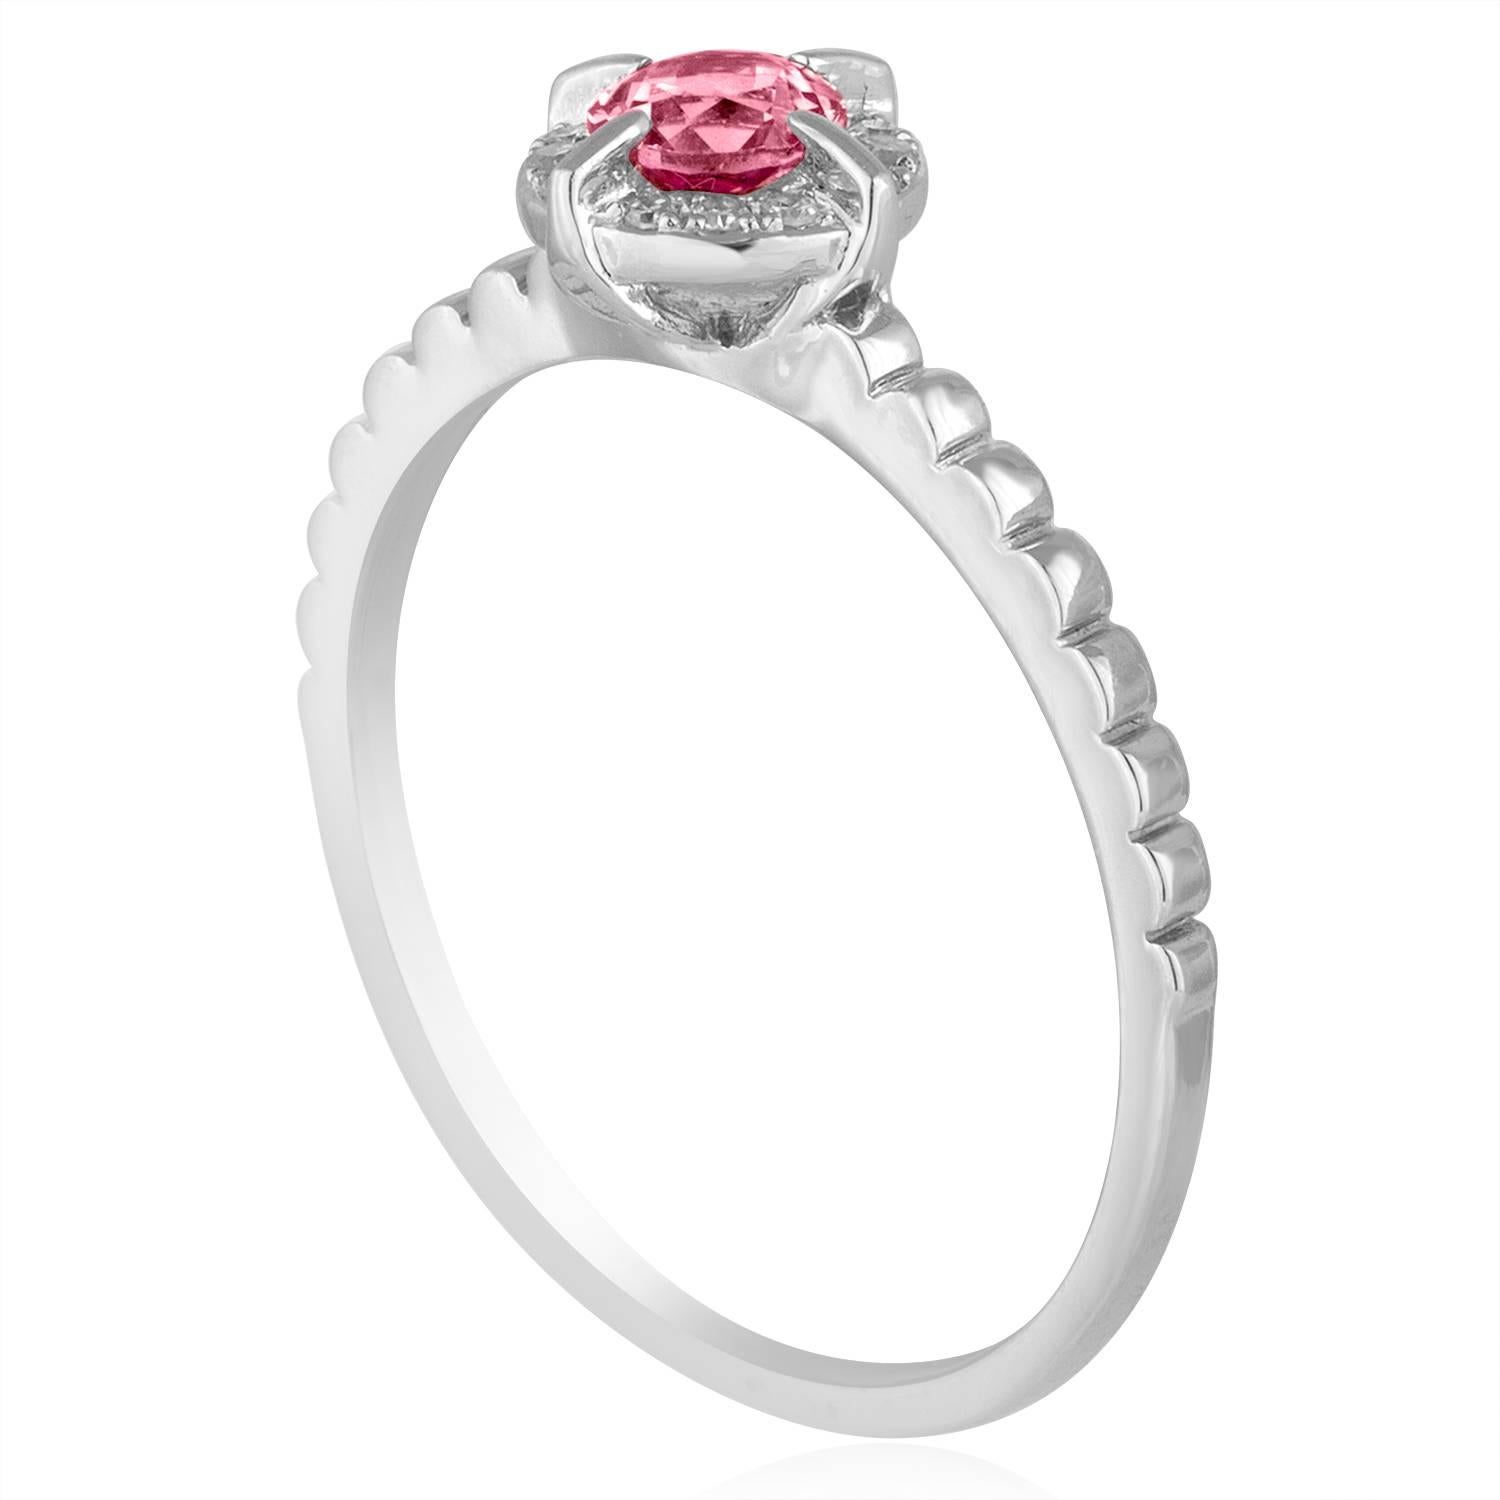 Stackable Pink Corundum Ring
The ring is 14K White Gold
There are 0.04 Carats In Diamonds H SI
The Center Stone is Round 0.32 Carats Pink Corundum (Lab-Created)
The top measures 1/4